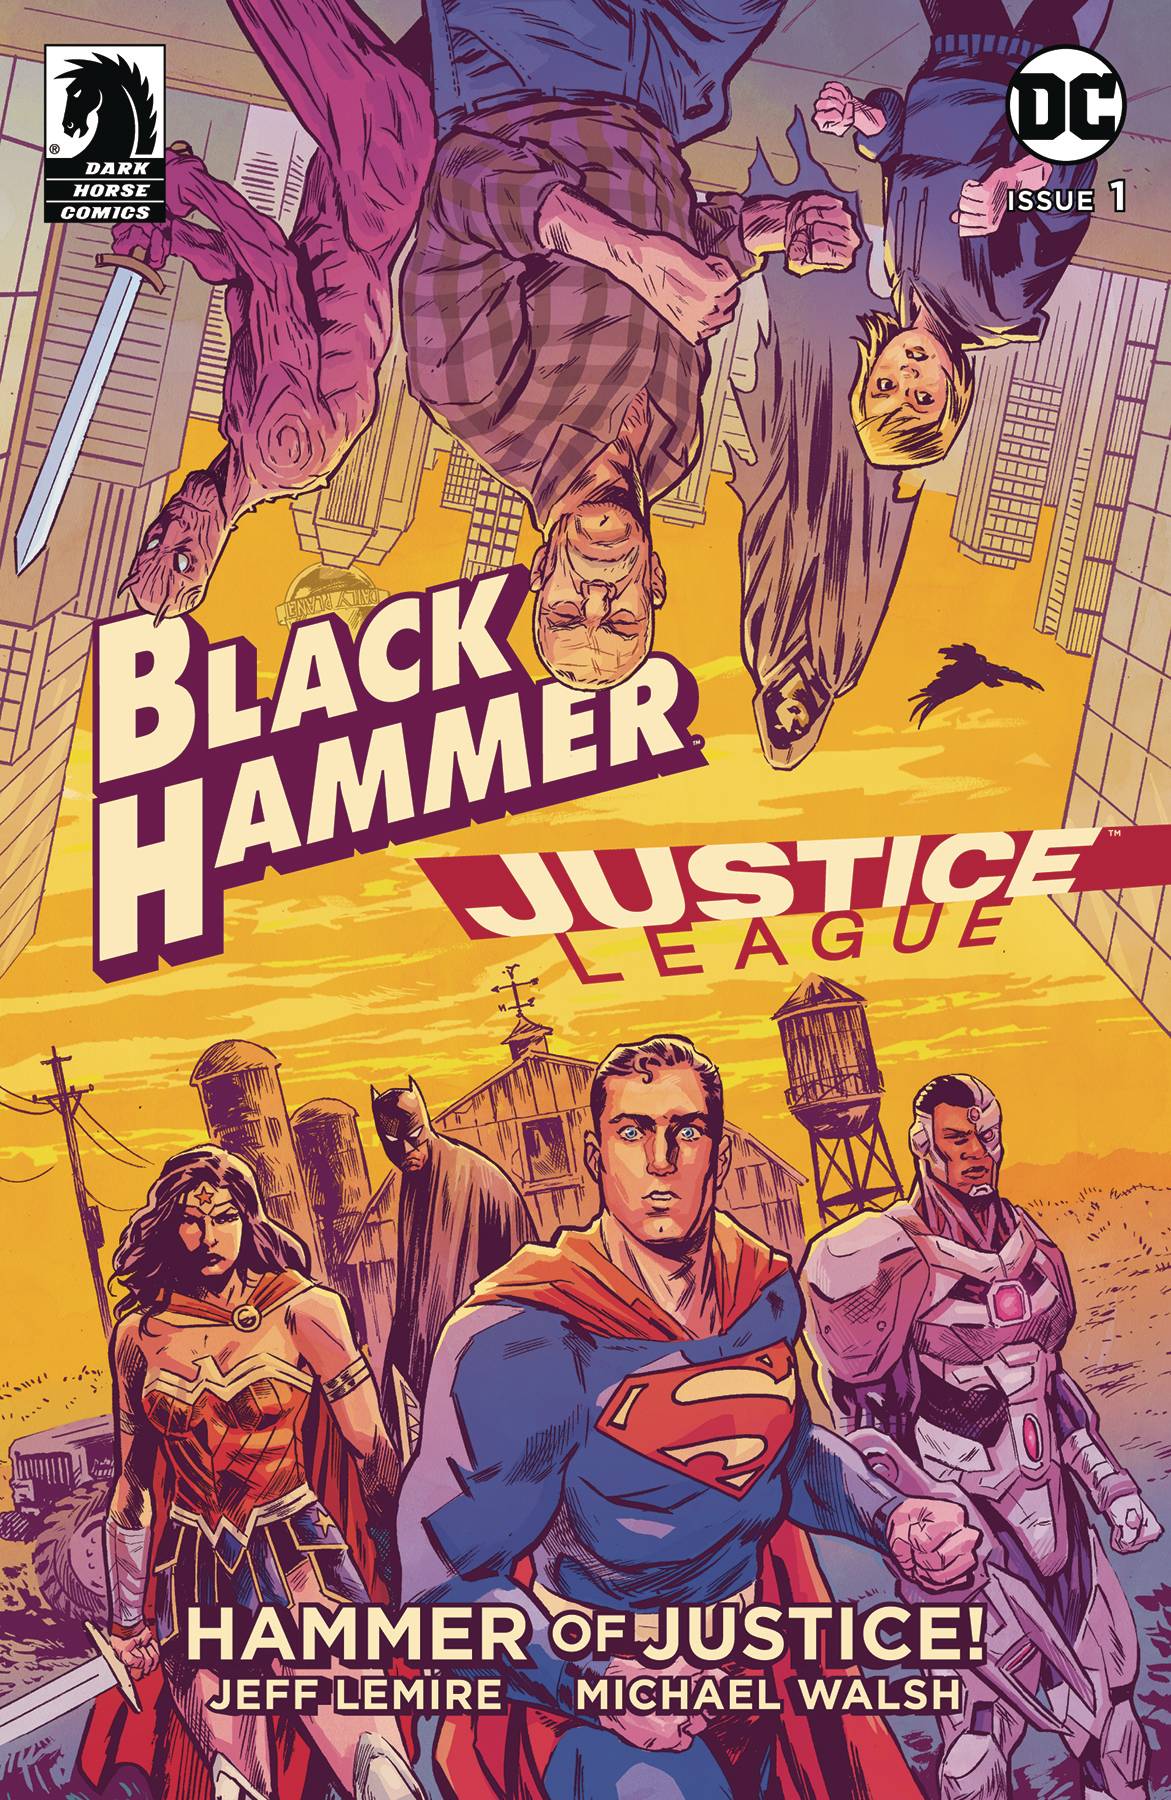 Black Hammer Justice League #1 - State of Comics